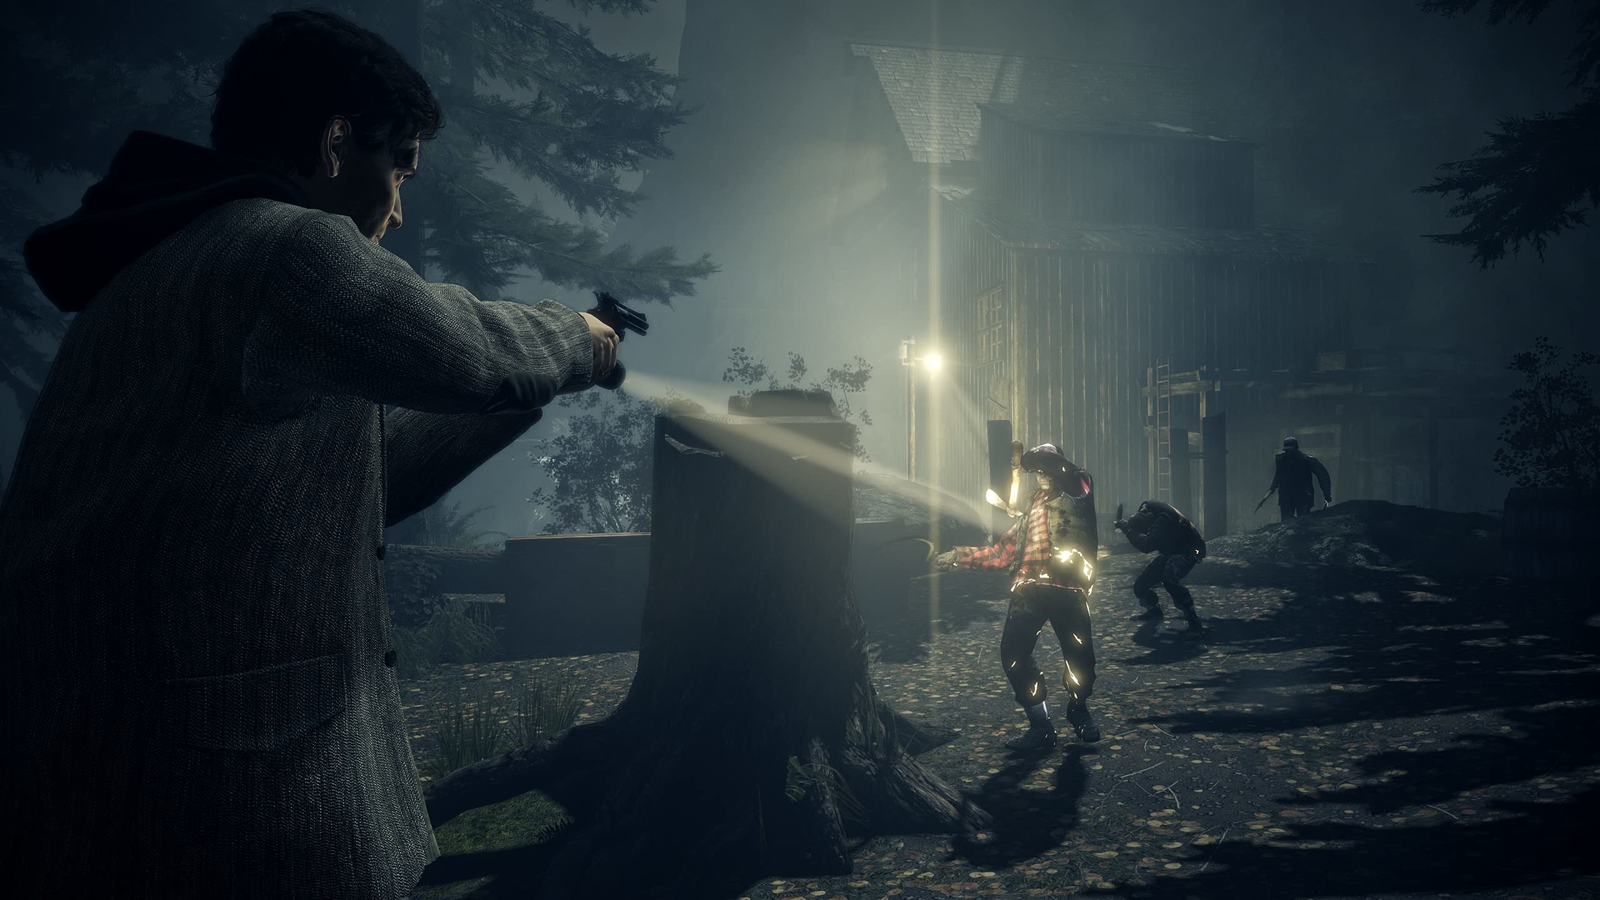 Is Alan Wake 2 coming to PS4 and Xbox One